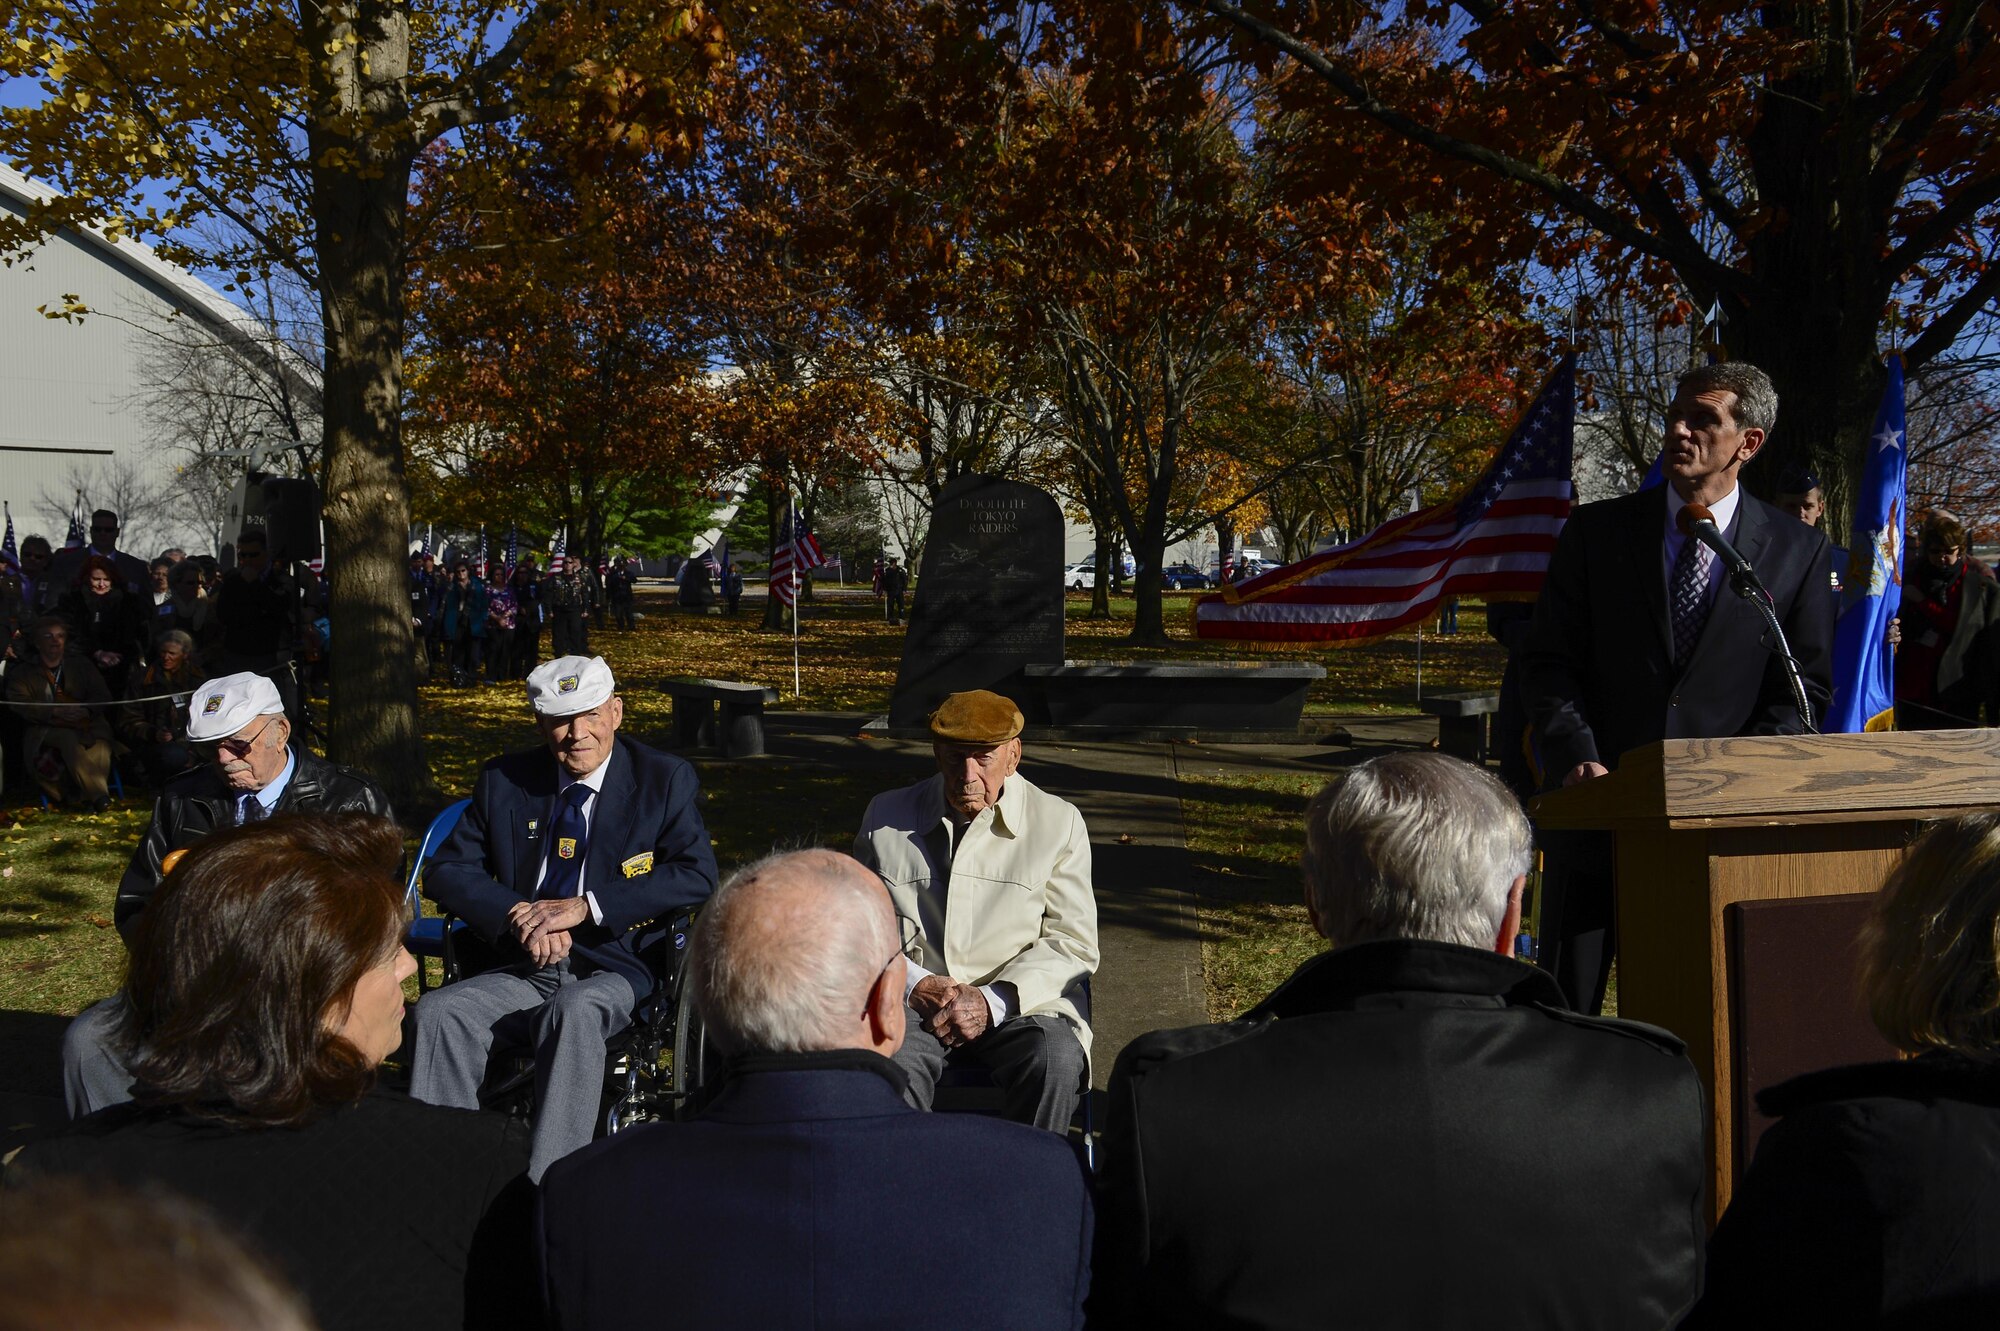 The Doolittle Tokyo Raiders paid tribute to their memorial at the National Museum of the U.S. Air Force Nov. 09, 2013 in Dayton, Ohio. The remaining raiders shared in their final toast, commemorating their historic mission and fallen wingmen.